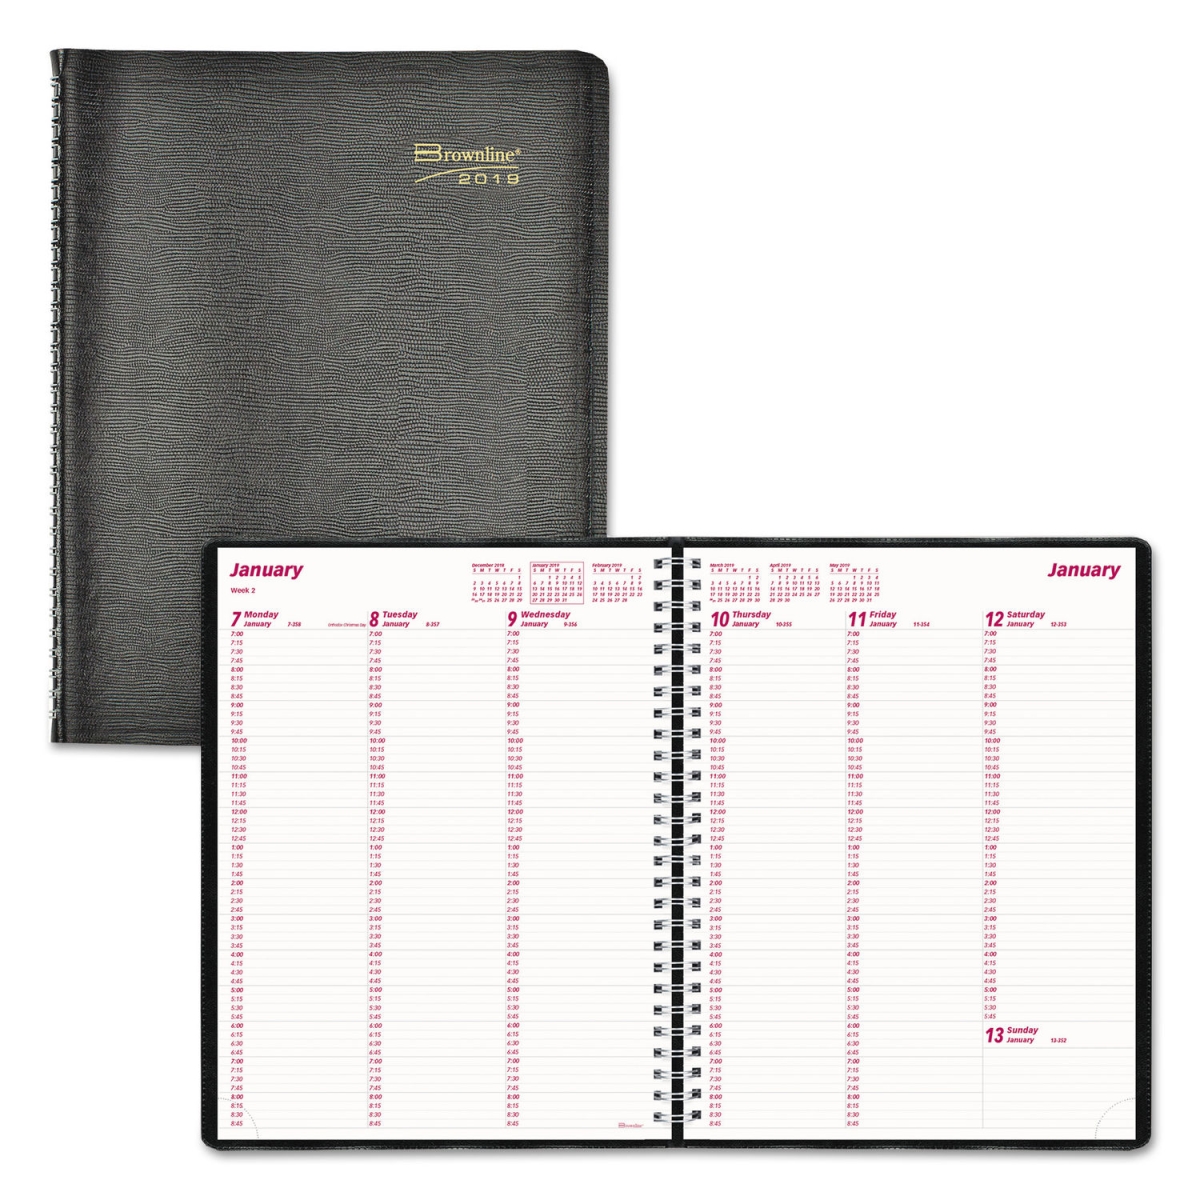 Redcb950blk Essential Collection Weekly Appointment Book For 2019, Black - 11 X 8.5 In.